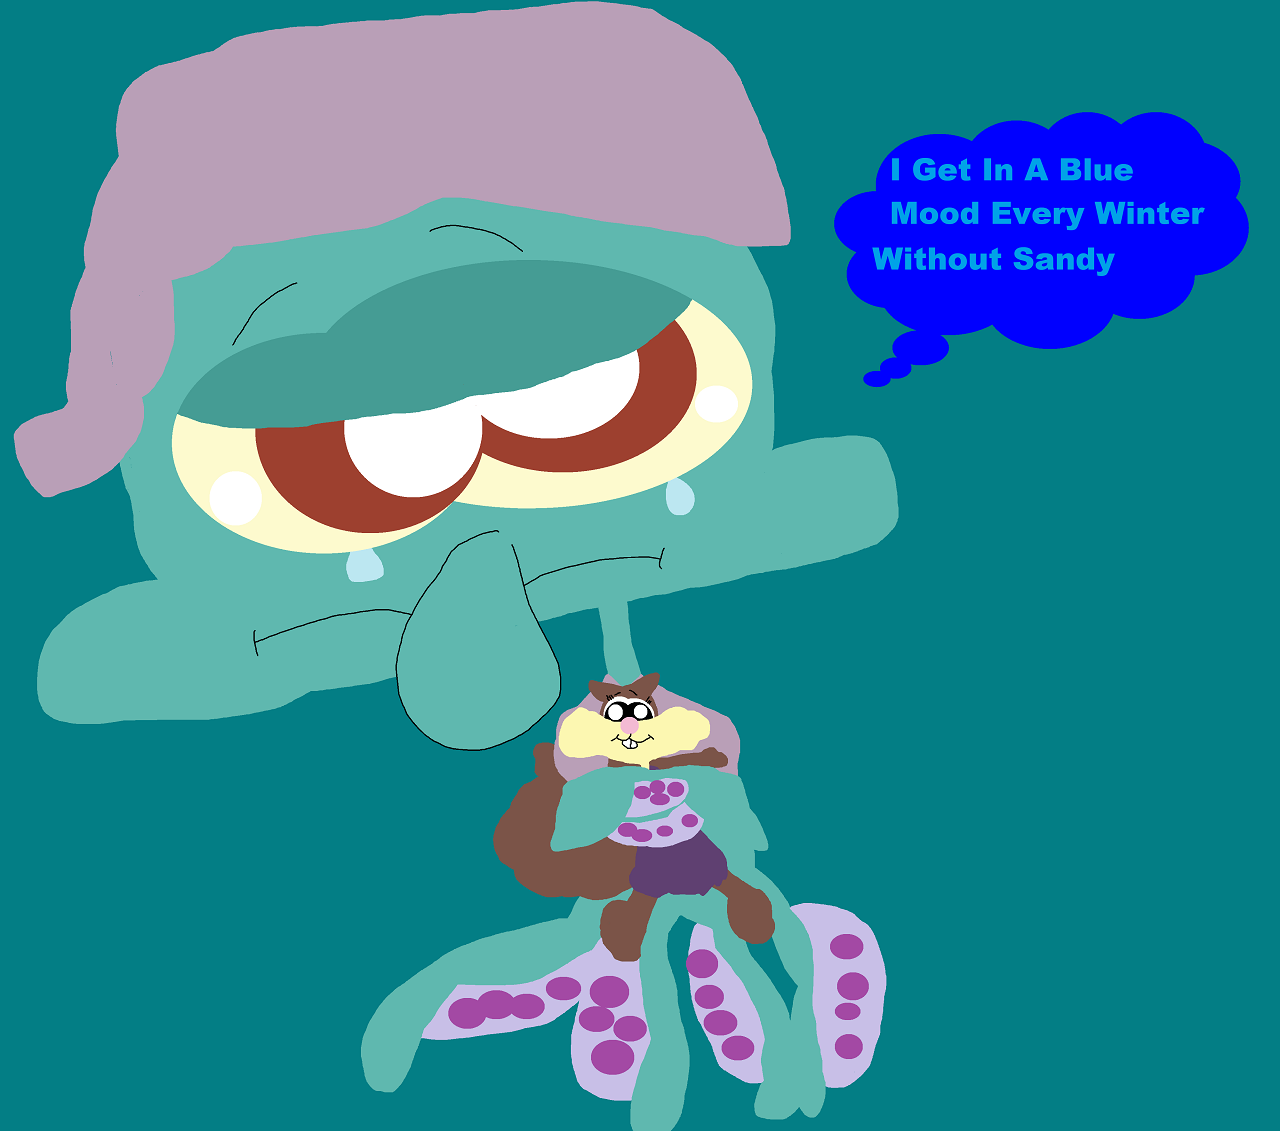 Squidward Gets In a Blue Mood Every Winter Without Sandy by Falconlobo